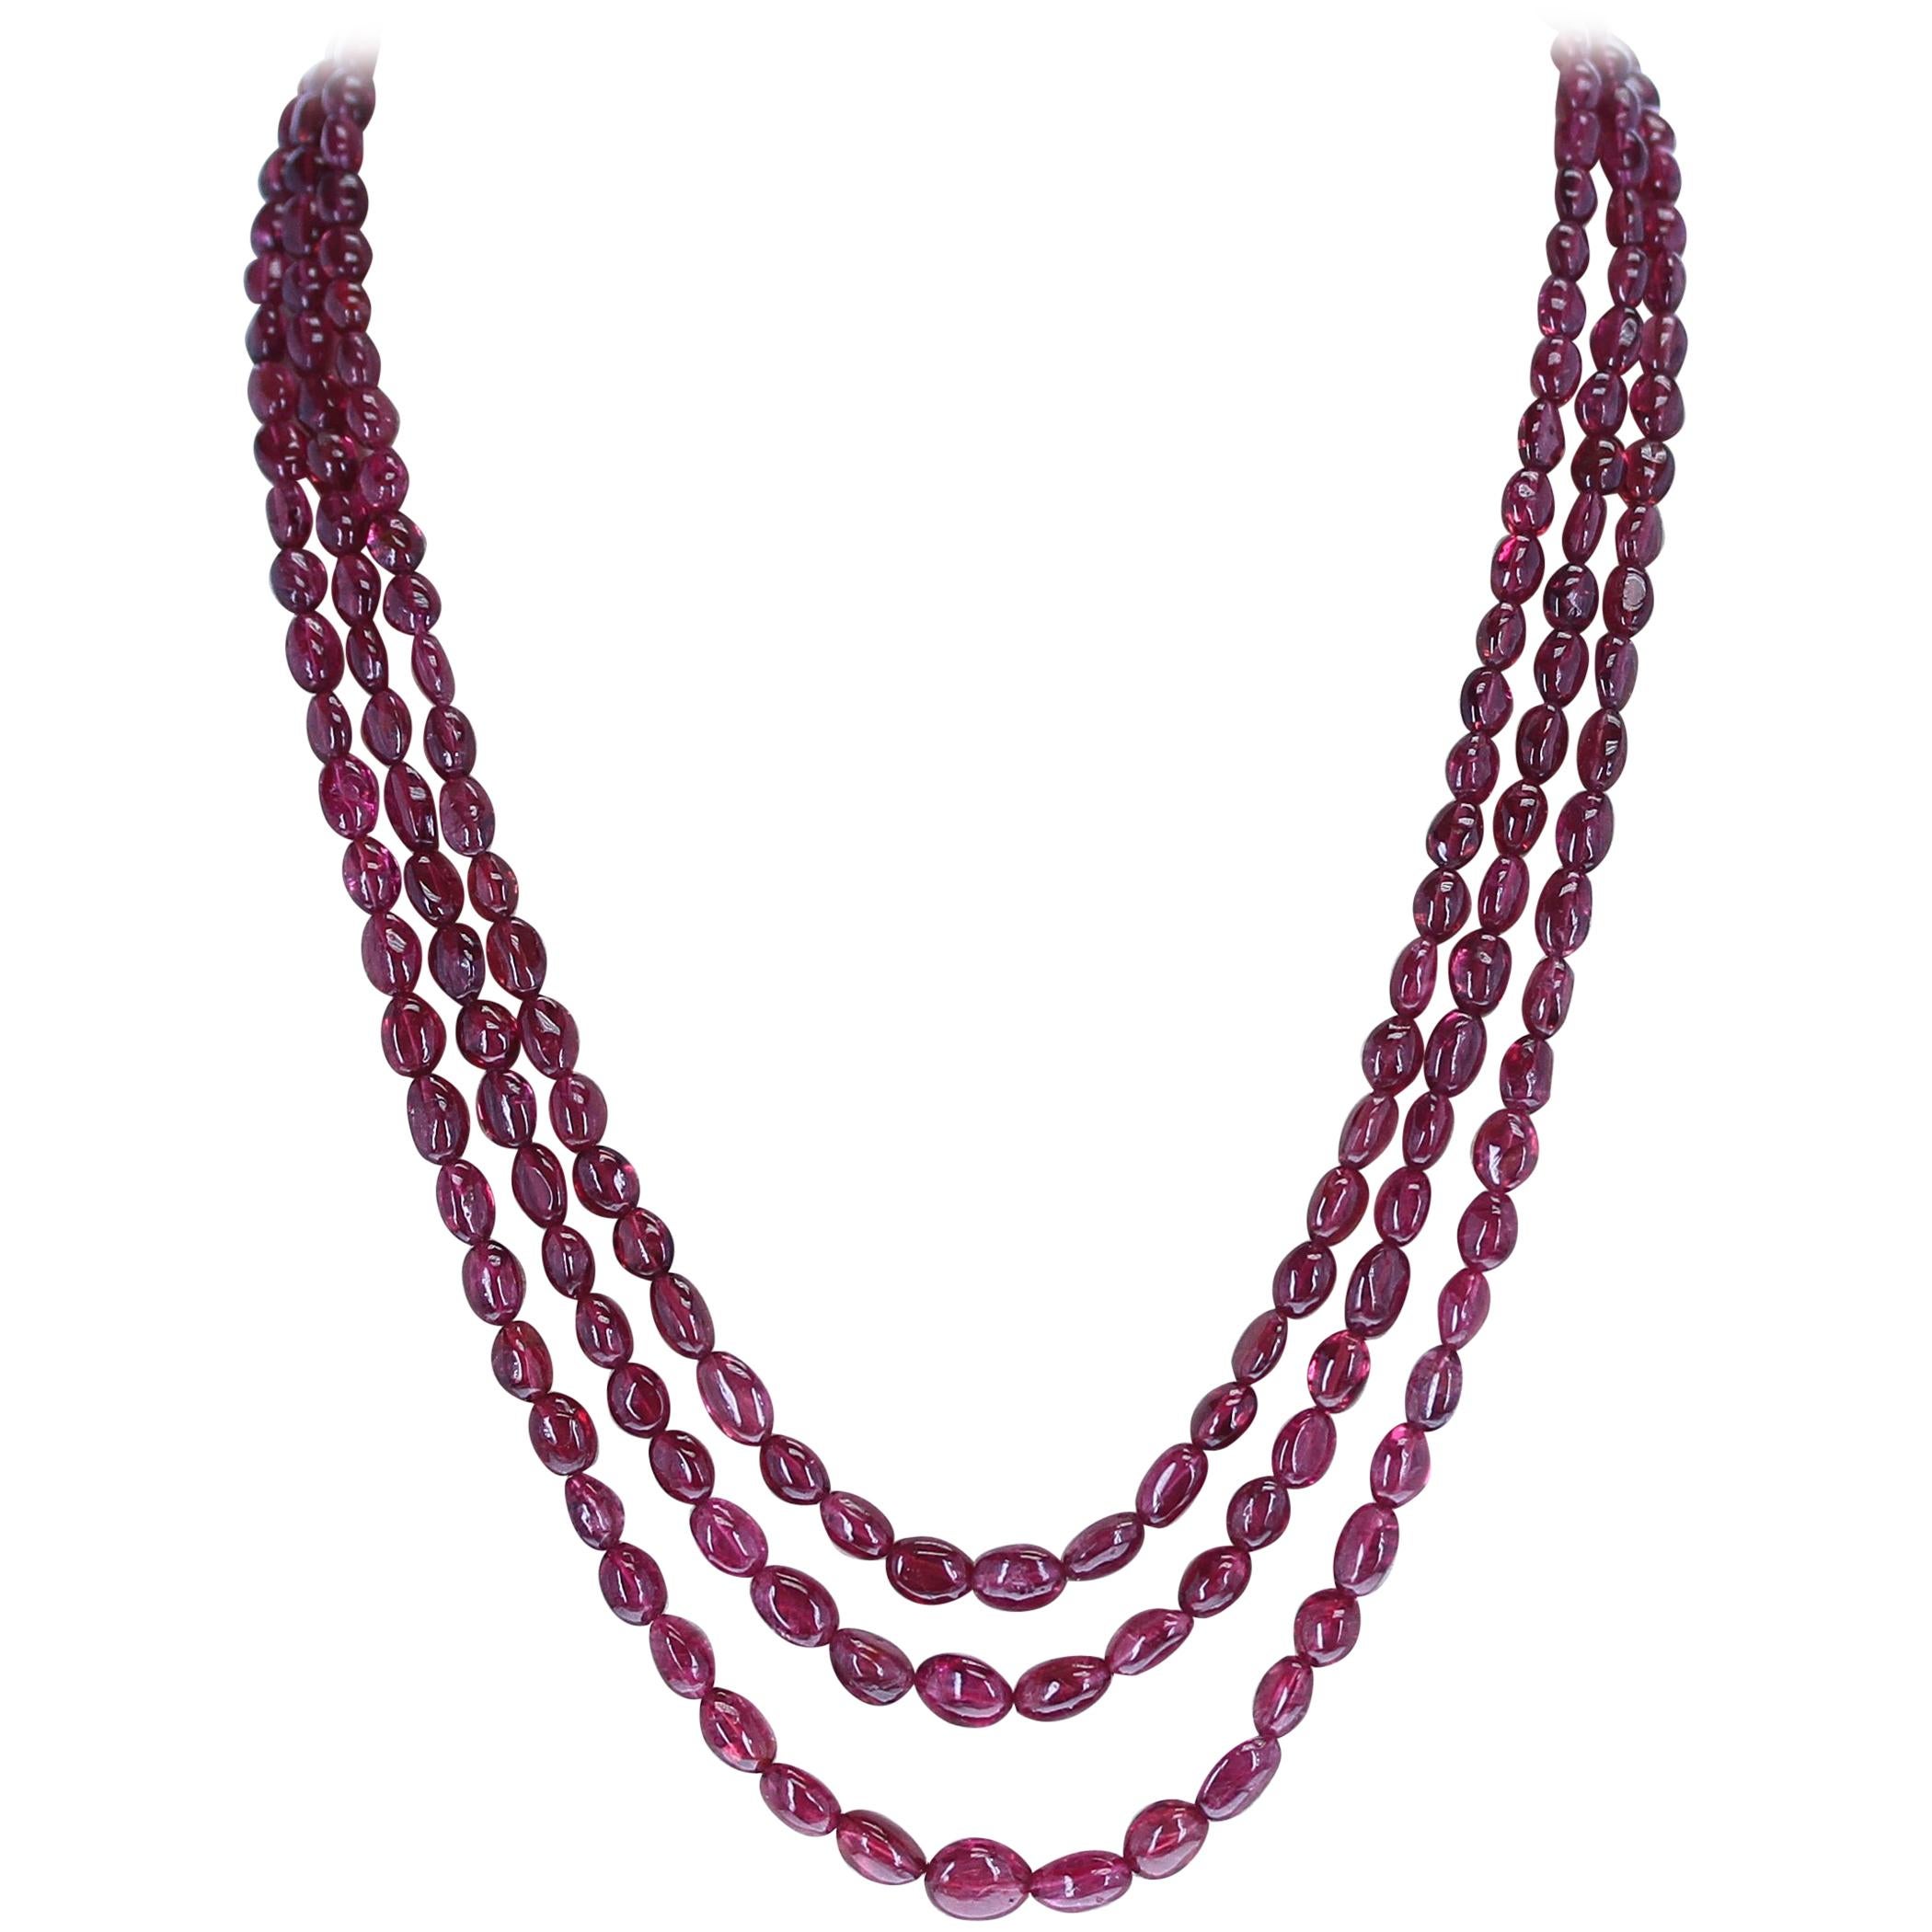 Genuine and Natural Tumbled and Smooth Spinel Beads Necklace, 14 Karat Clasp